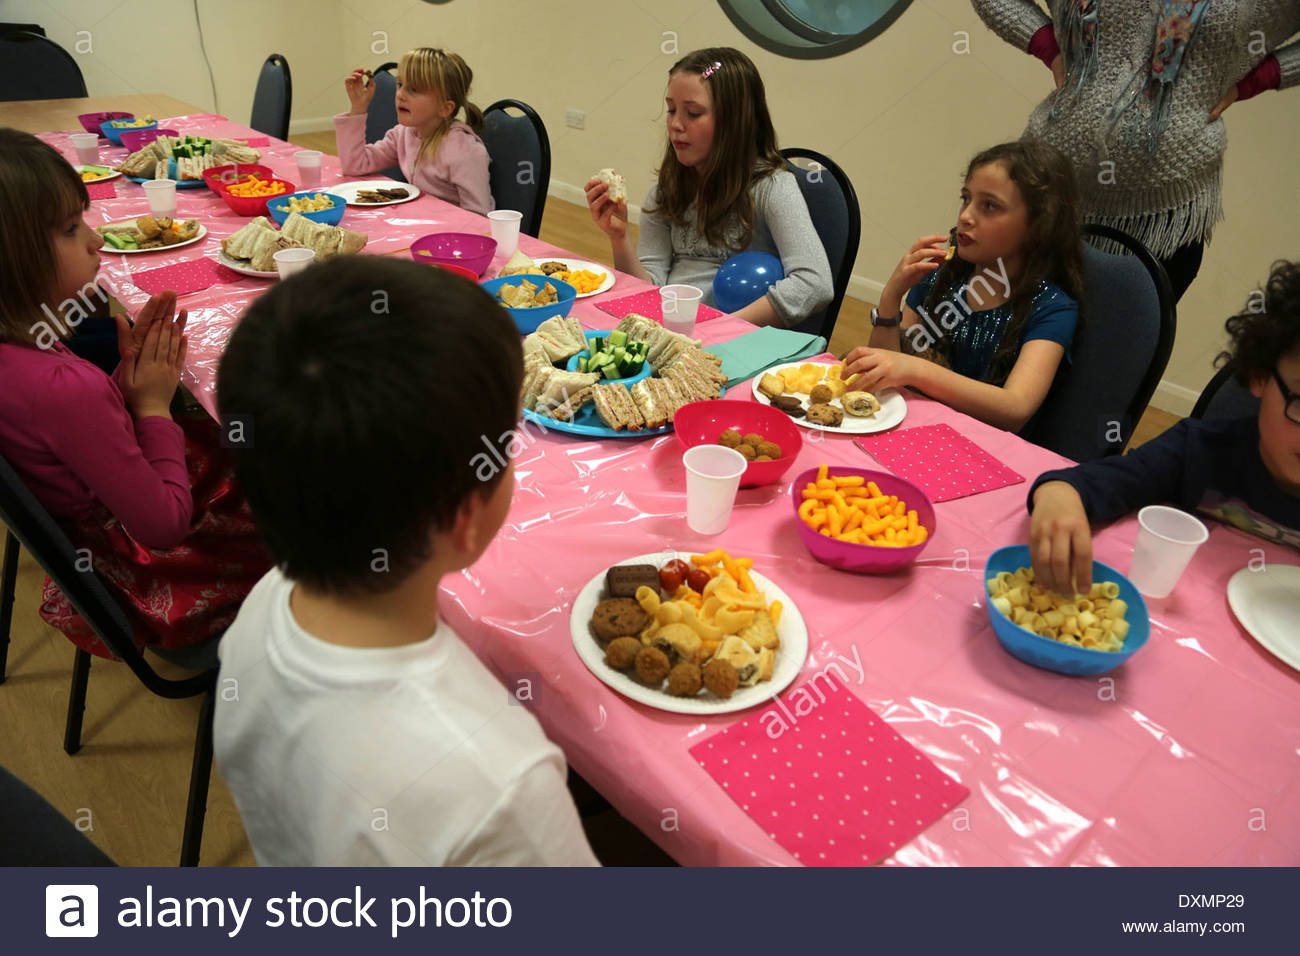 8 Year Old Birthday Party
 8 Year Old Girl s Birthday Party Children At The Table